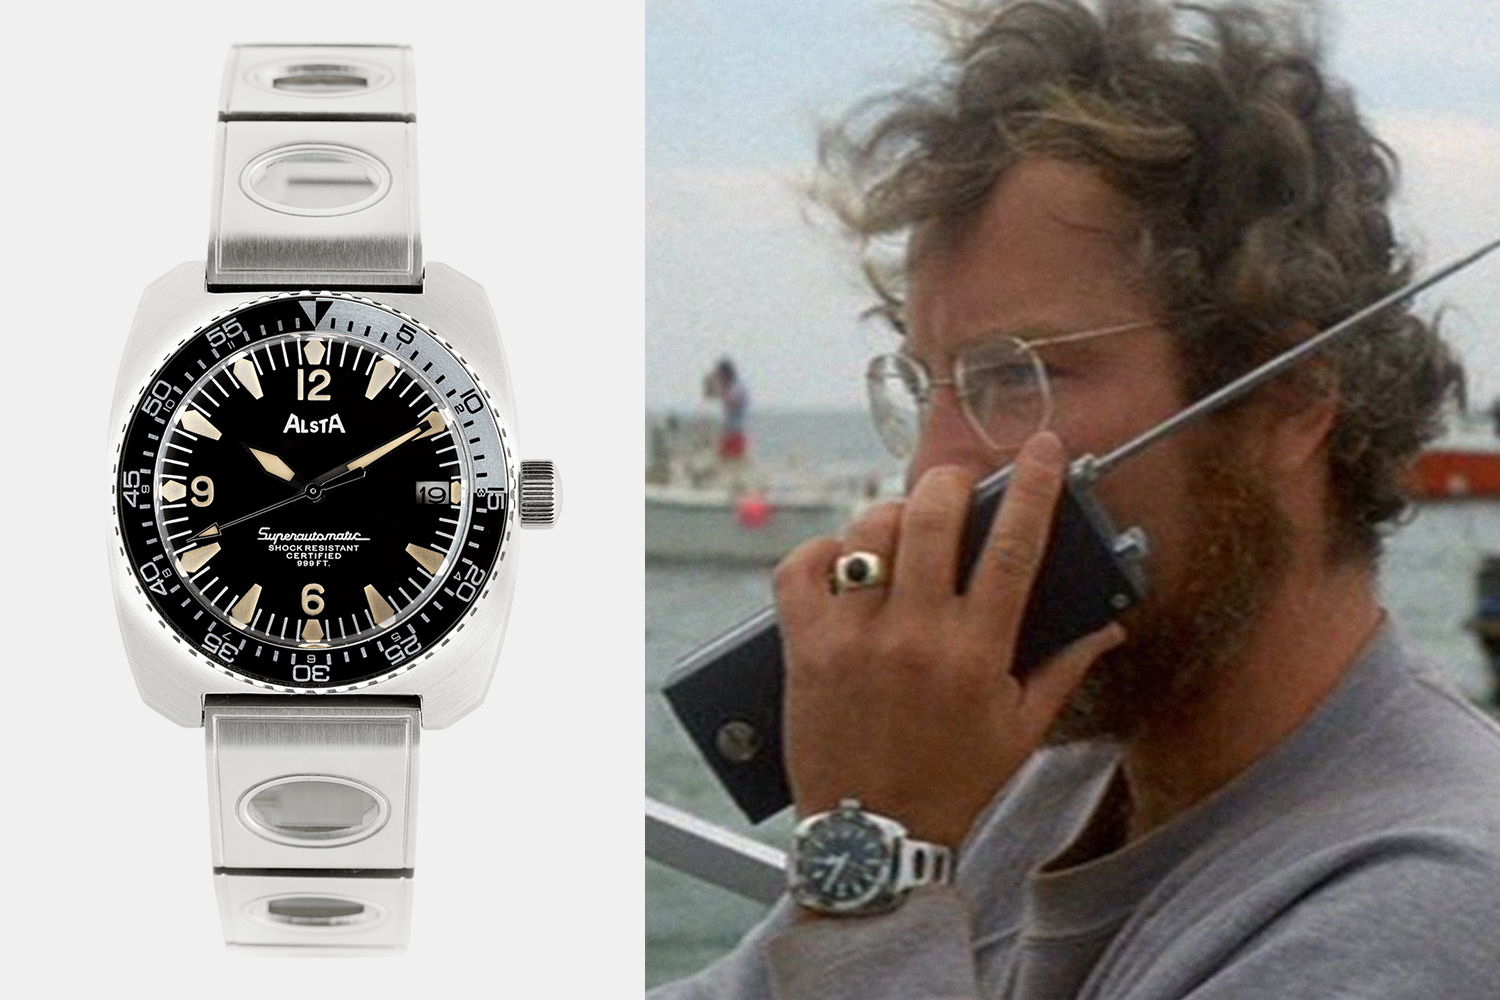 The new Nautoscaph Superautomatic watch from Alsta which was originally worn by Richard Dreyfuss in "Jaws"